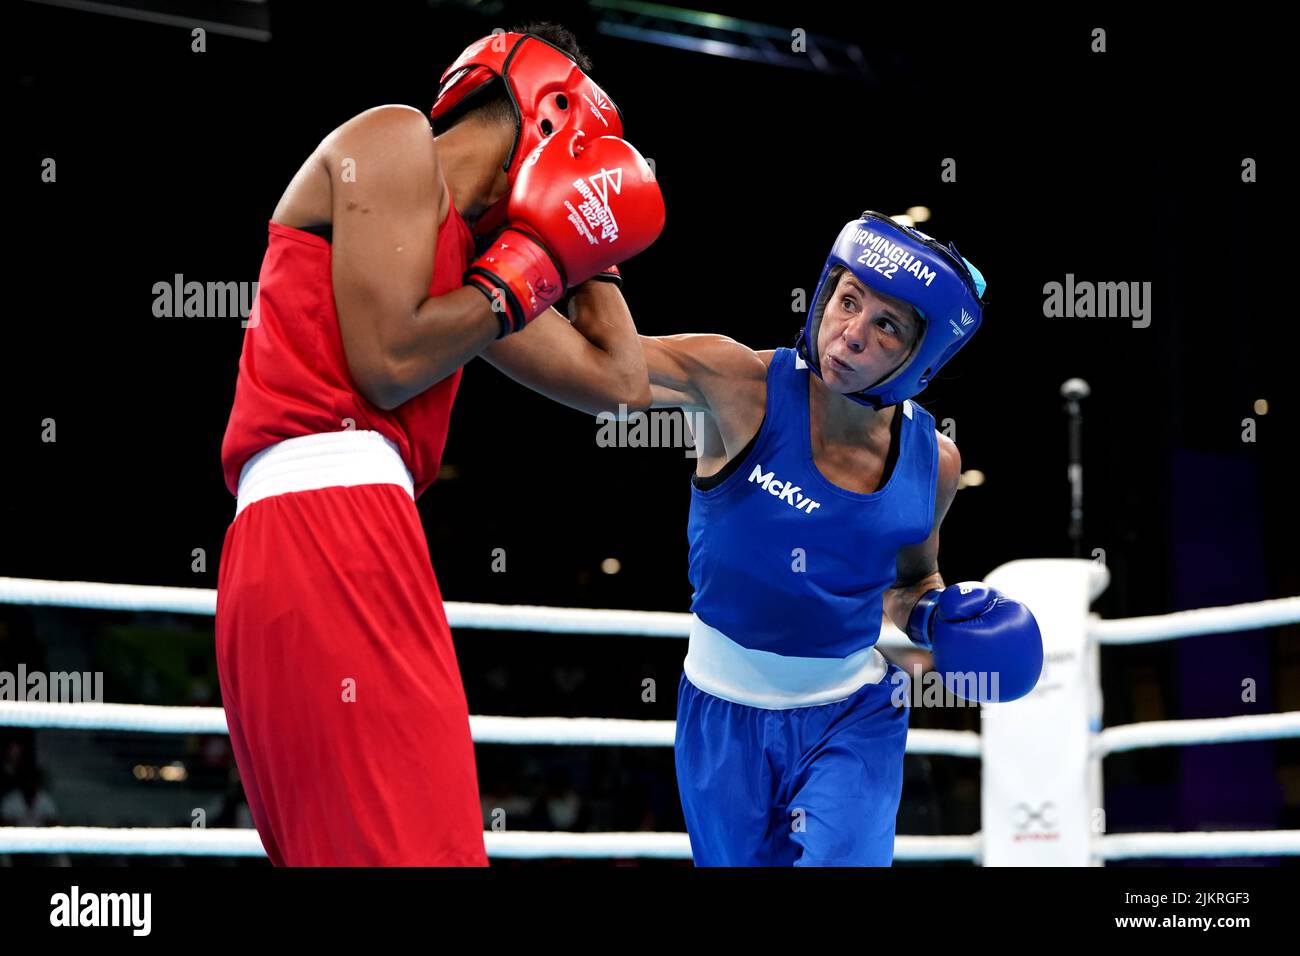 Sri Lanka's Keshani Hansika and Northern Ireland's Carly McNaul (right) during the Women’s Over 48kg-50kg (Light Fly) - Quarter-Final 1 at The NEC on day six of the 2022 Commonwealth Games in Birmingham. Picture date: Wednesday August 3, 2022. Stock Photo